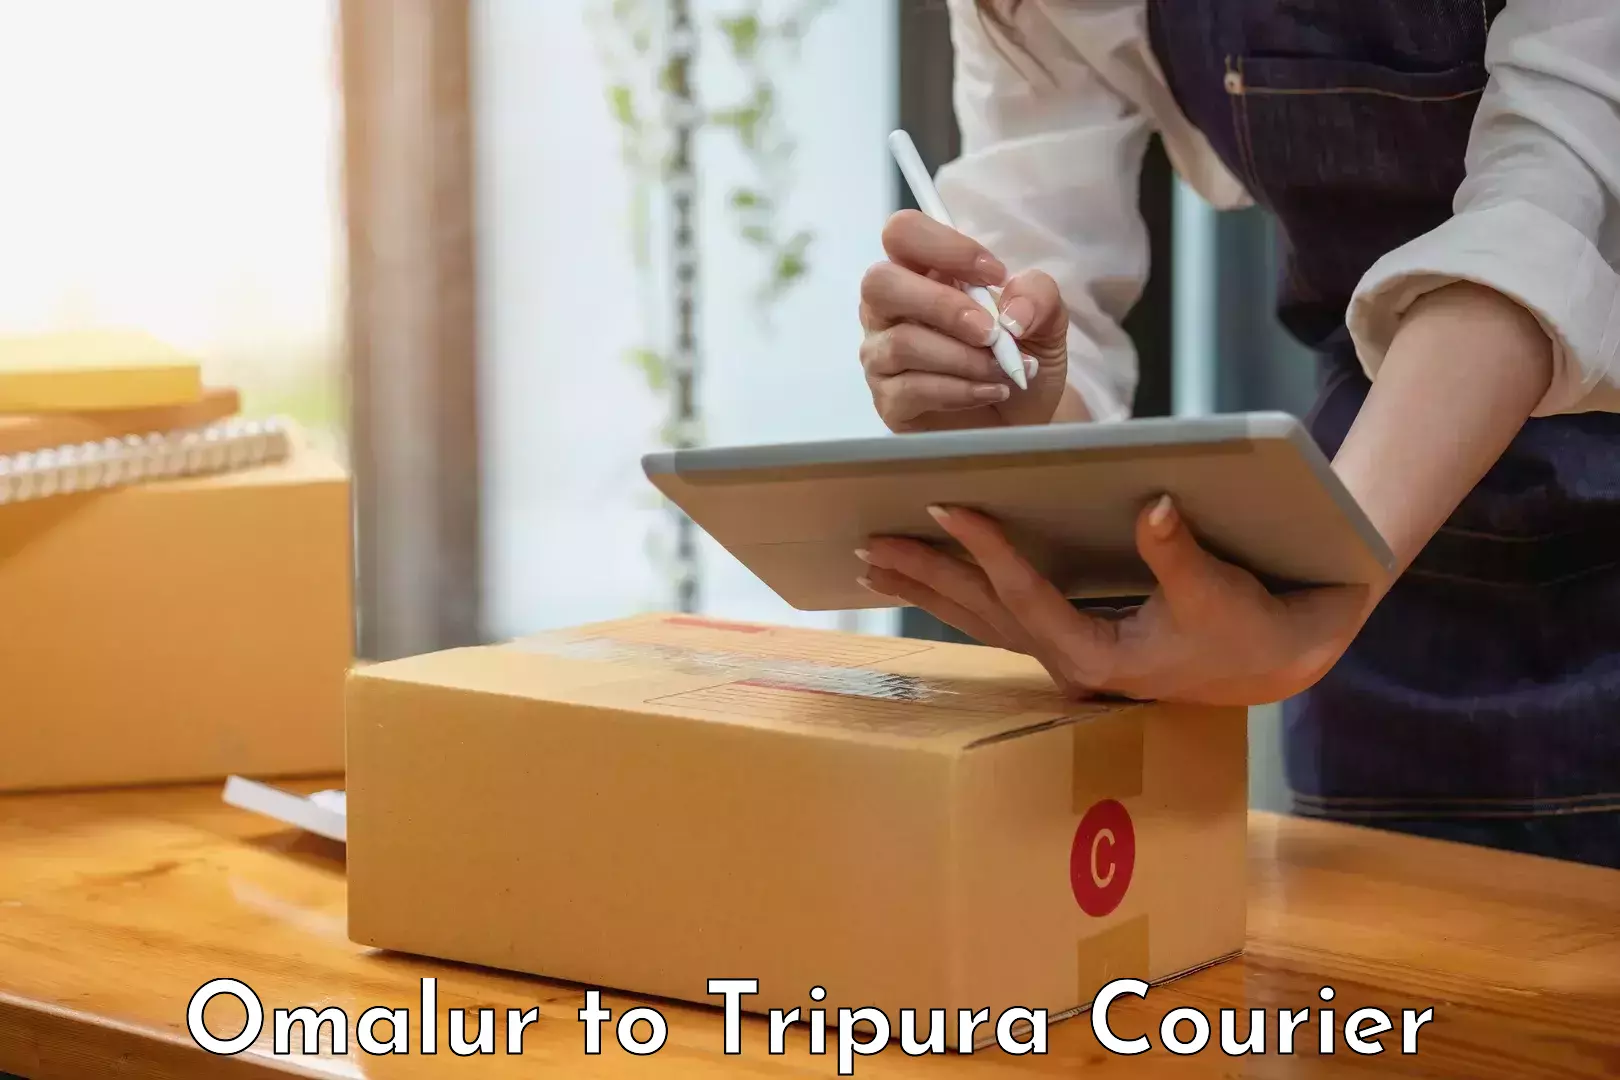 Large package courier Omalur to Udaipur Tripura